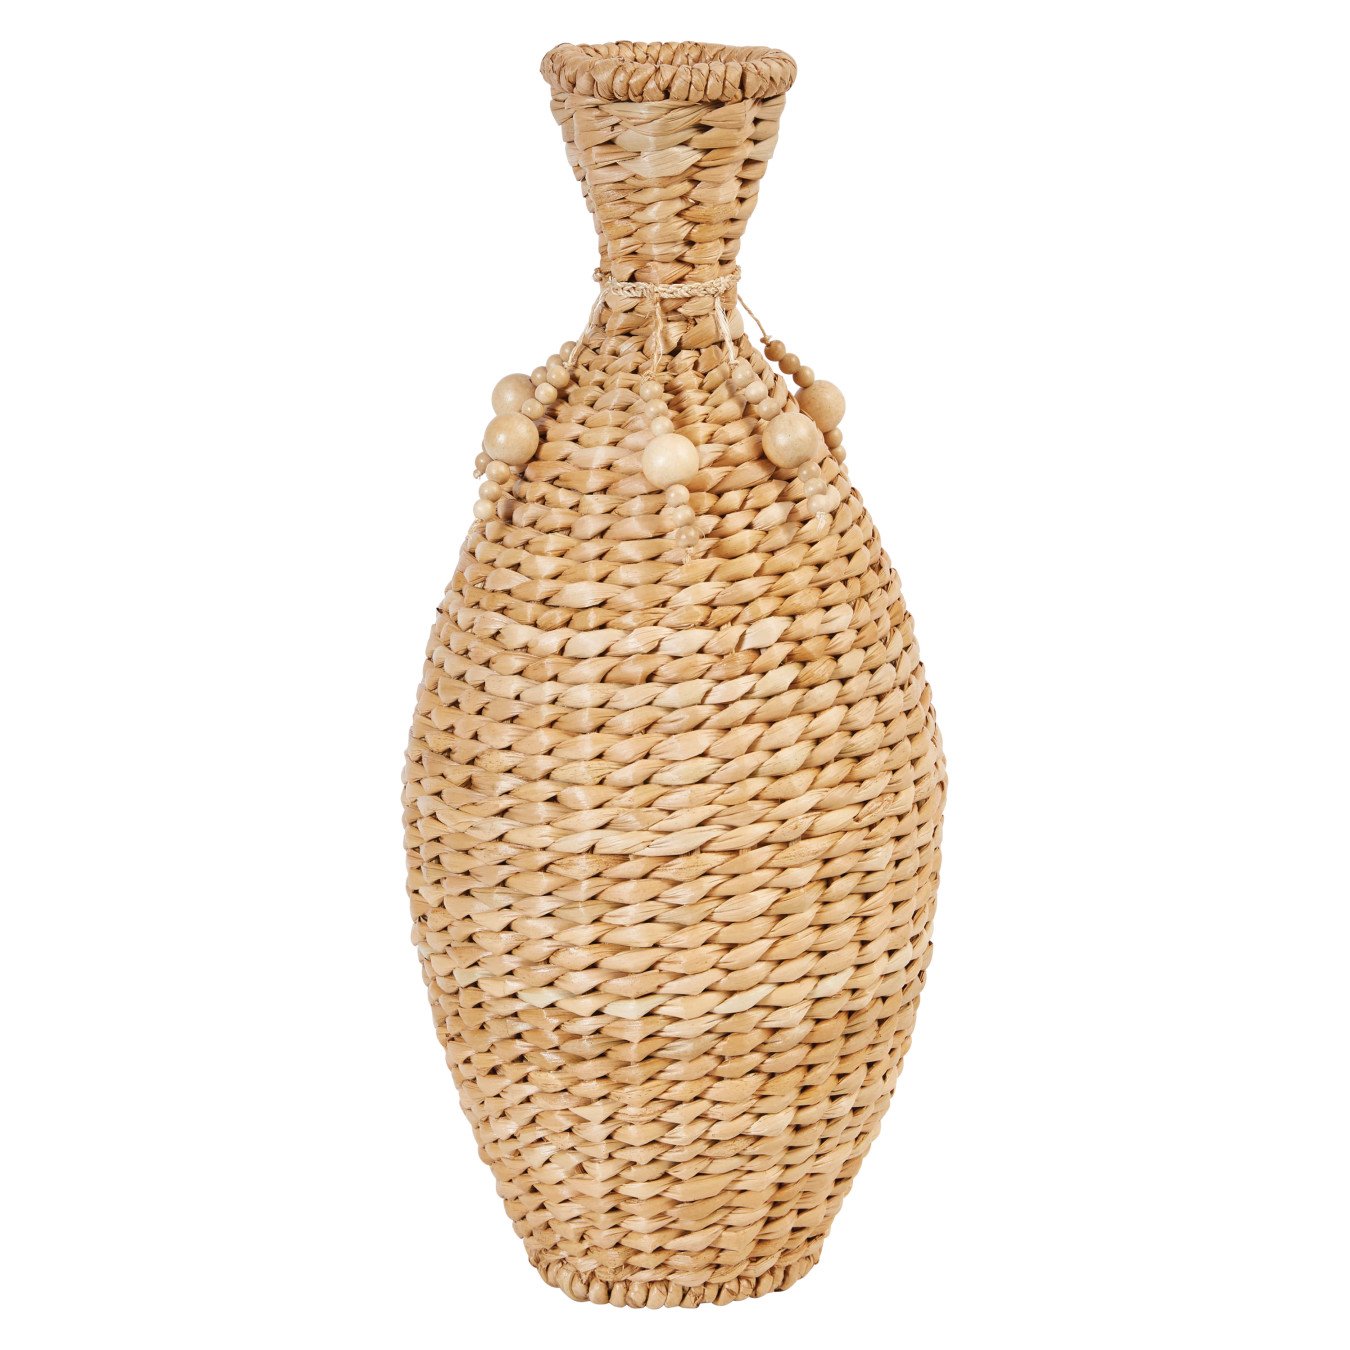 Decorative 18.5"H Water Hyacinth Vase with Beaded Tassels